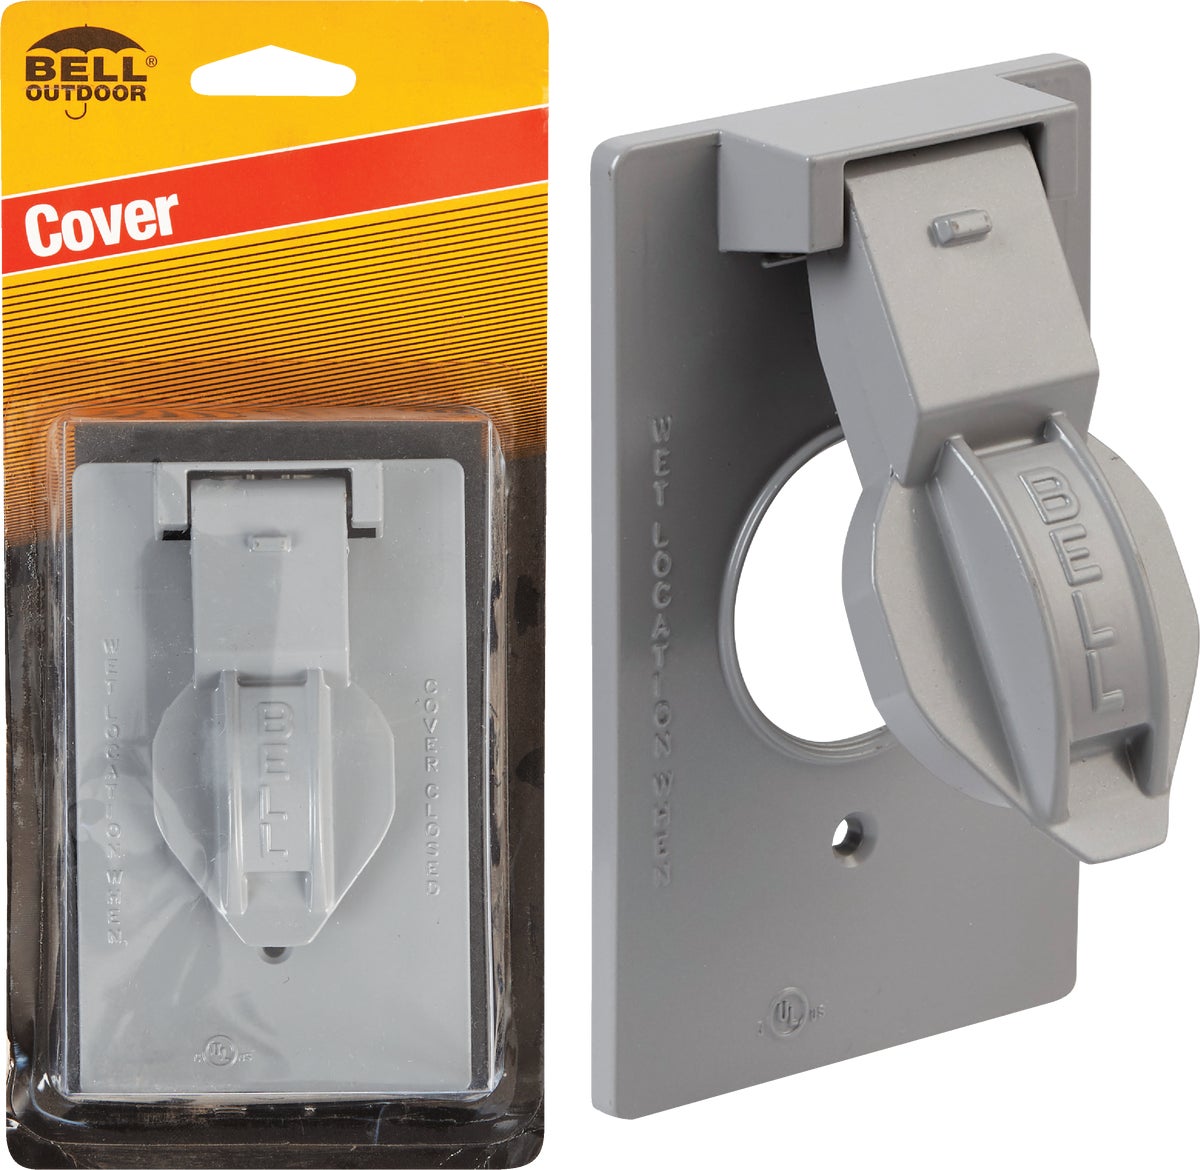 Bell 5031-0 Single Gang Electric Receptacle Weatherproof Flipup Outlet Cover H41 